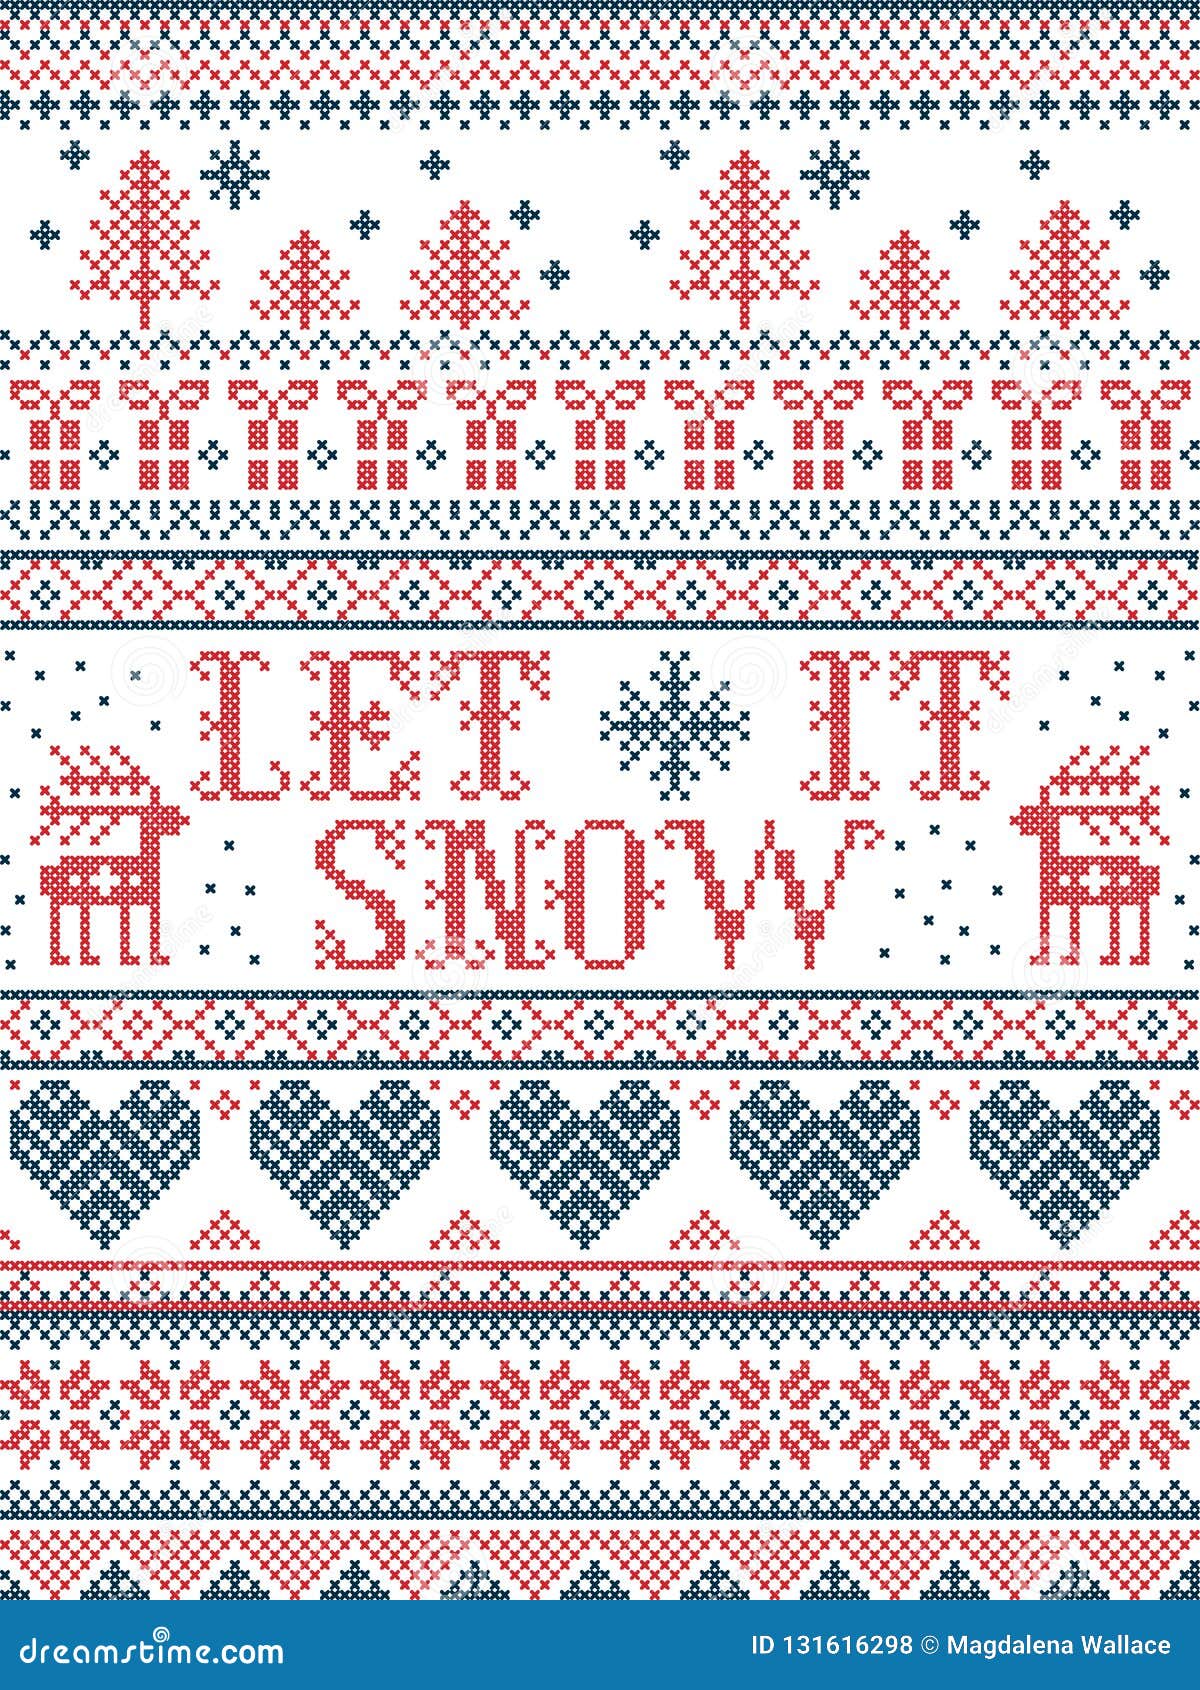 seamless christmas pattern let it snow scandinavian style, inspired by norwegian christmas, festive winter in cross stitch